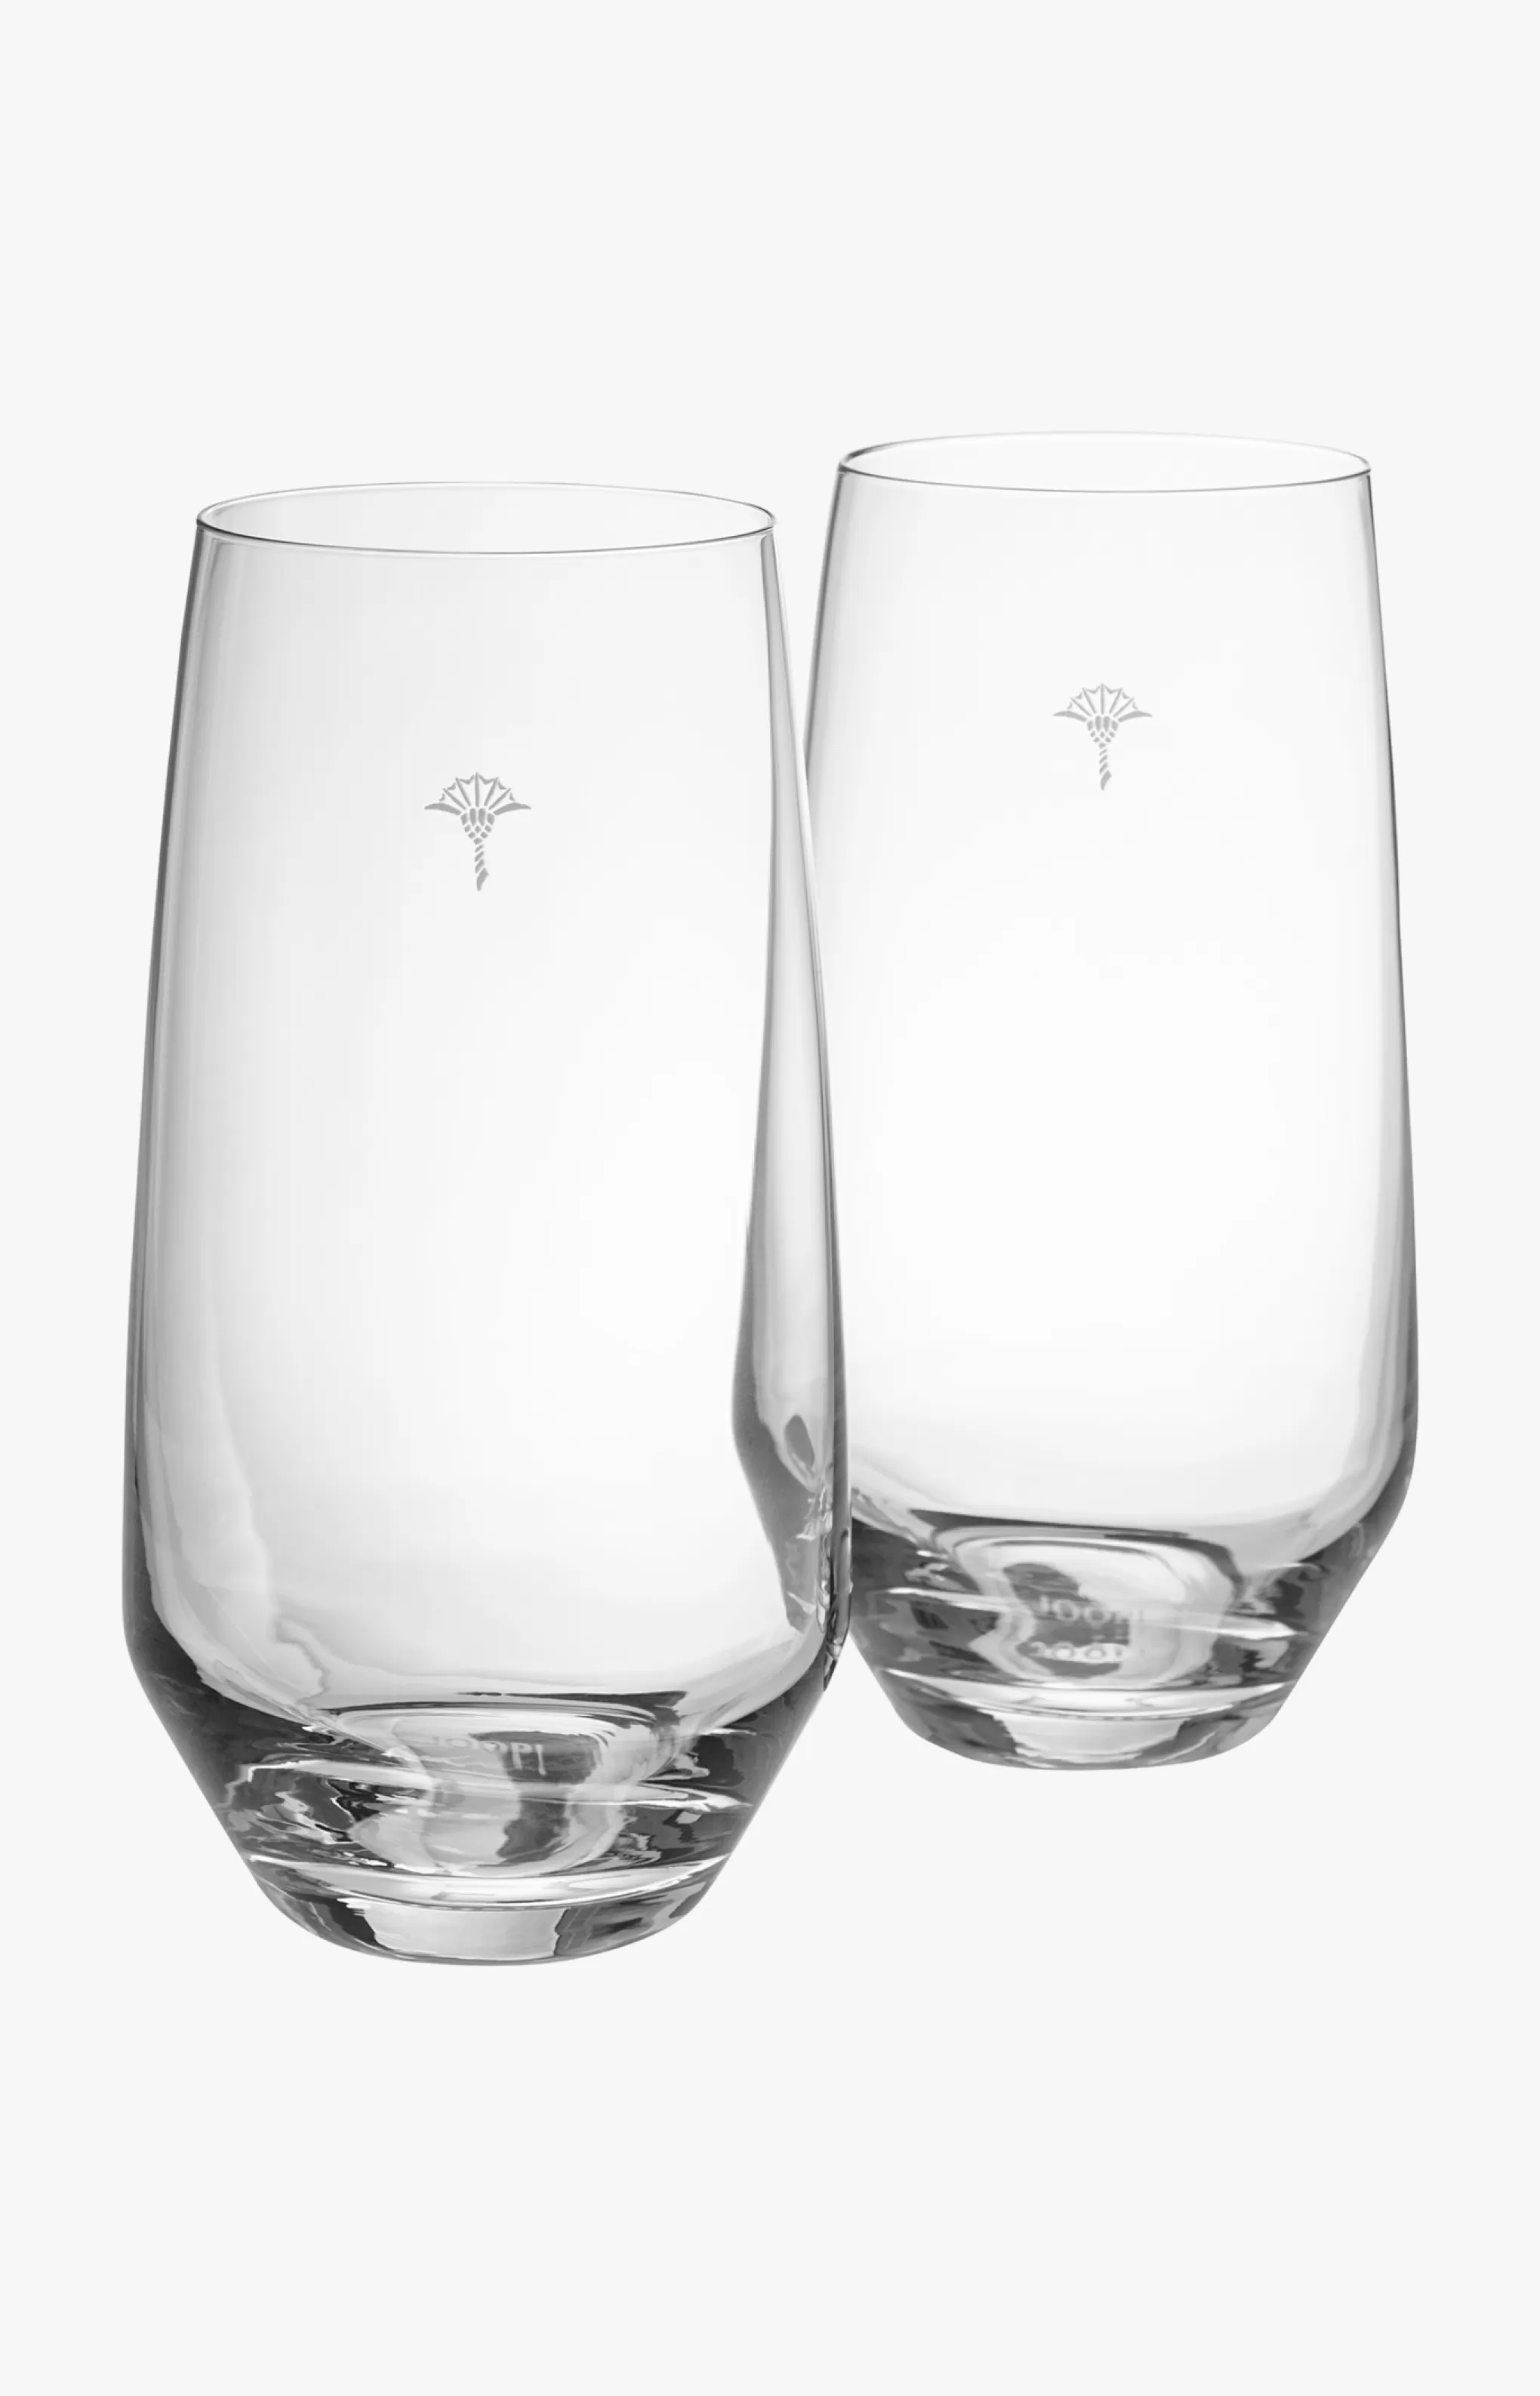 Glassware | Discover Everything*JOOP Glassware | Discover Everything Single Cornflower long drink glass - set of 2